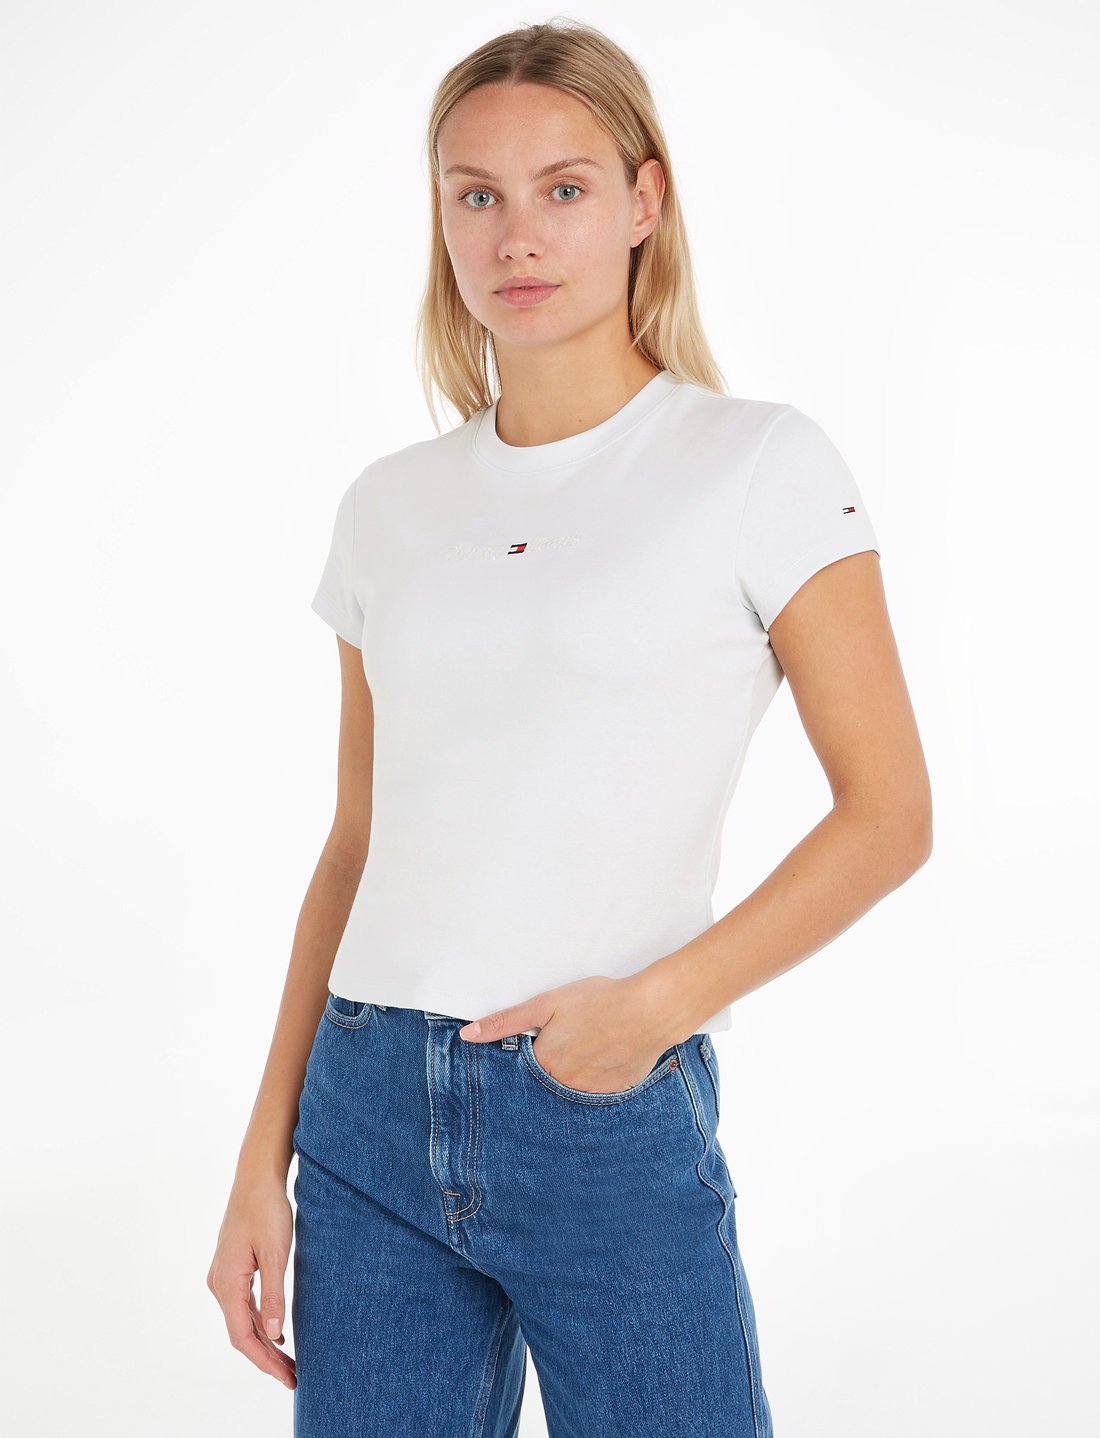 Ss Linear Jeans Serif - Tjw T-shirts Tommy Bby